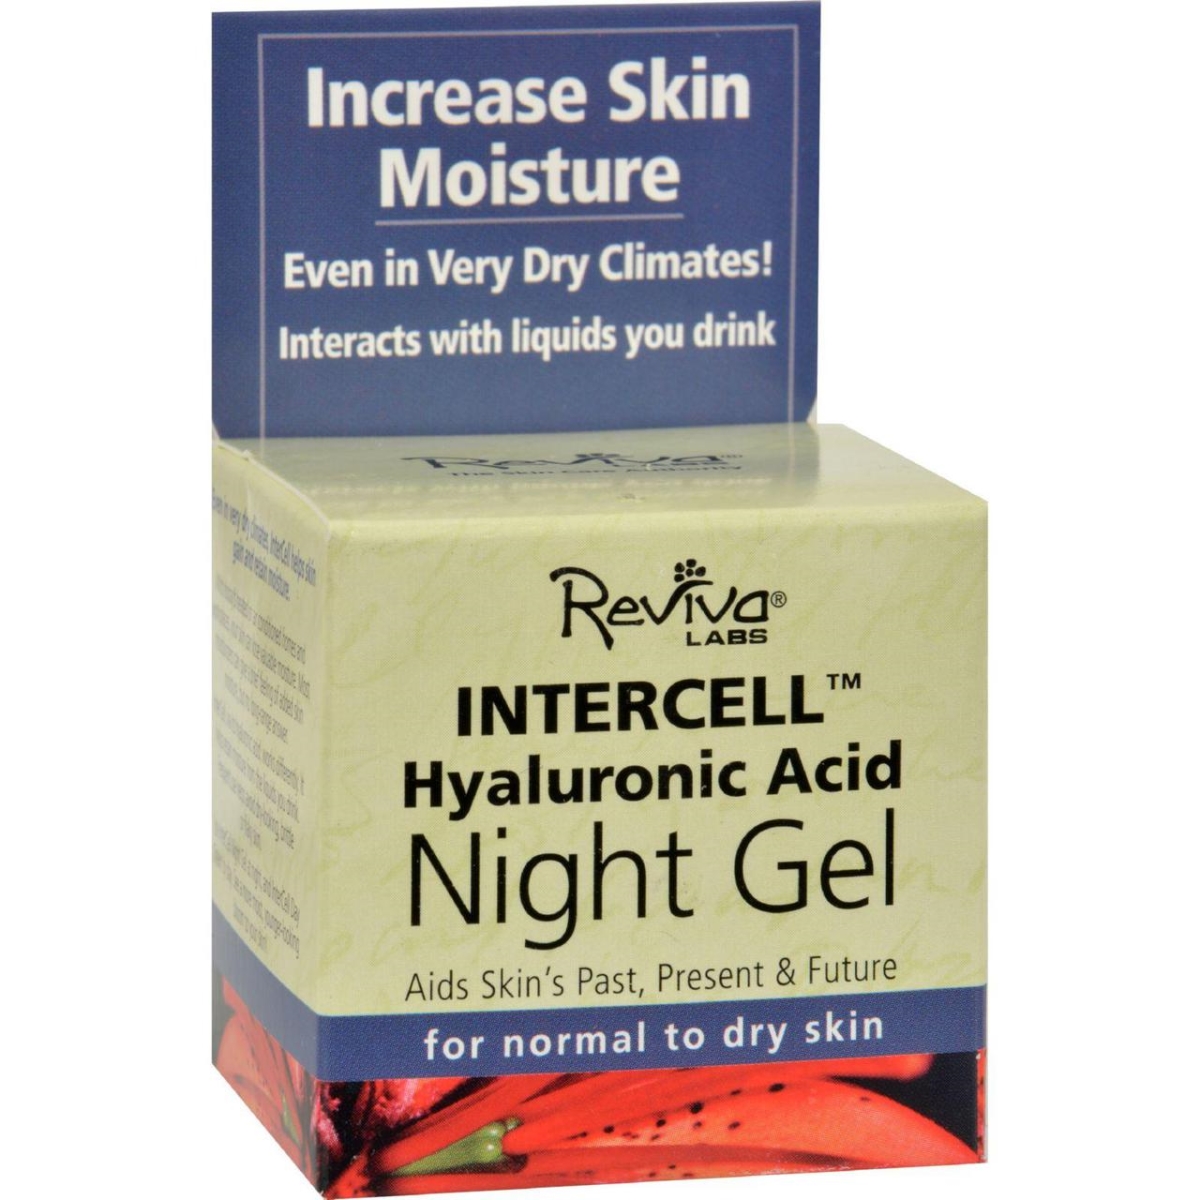 Hg0830760 1.25 Oz Intercell Night Gel With Hyaluronic Acid